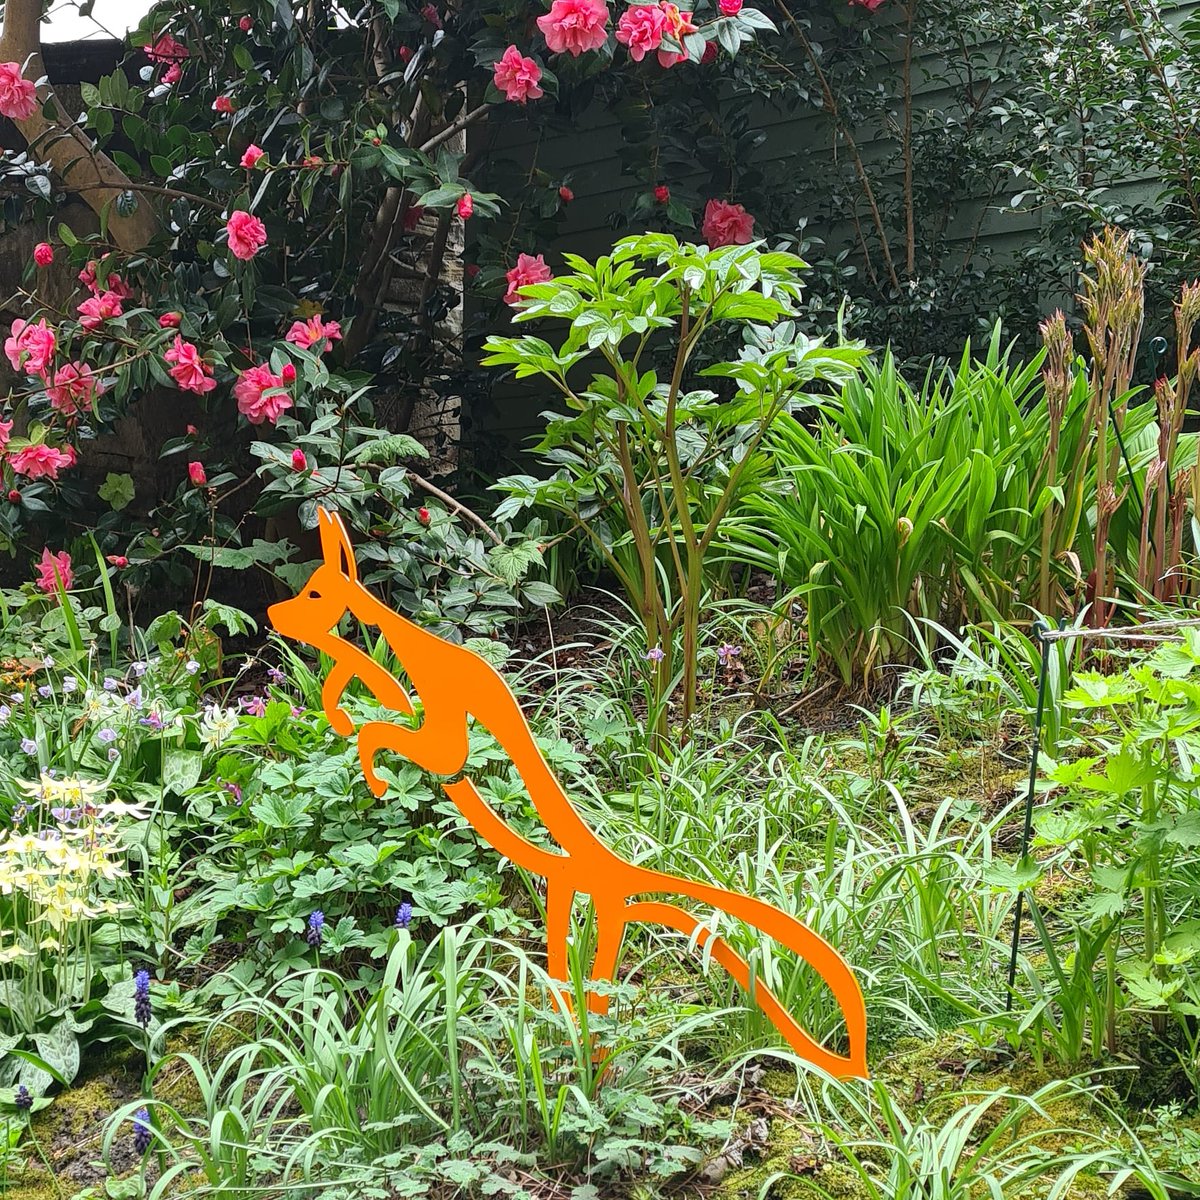 Vinnie the Fox in his Edinburgh home. We love seeing our #sculpture friends in their homes. Keep sending us your pics so we can share them with the world.
#gardens #gardensculptures #gardenfox #foxsculpture #edinburgh #scotland #madeinscotland #gardening #gardenfriends